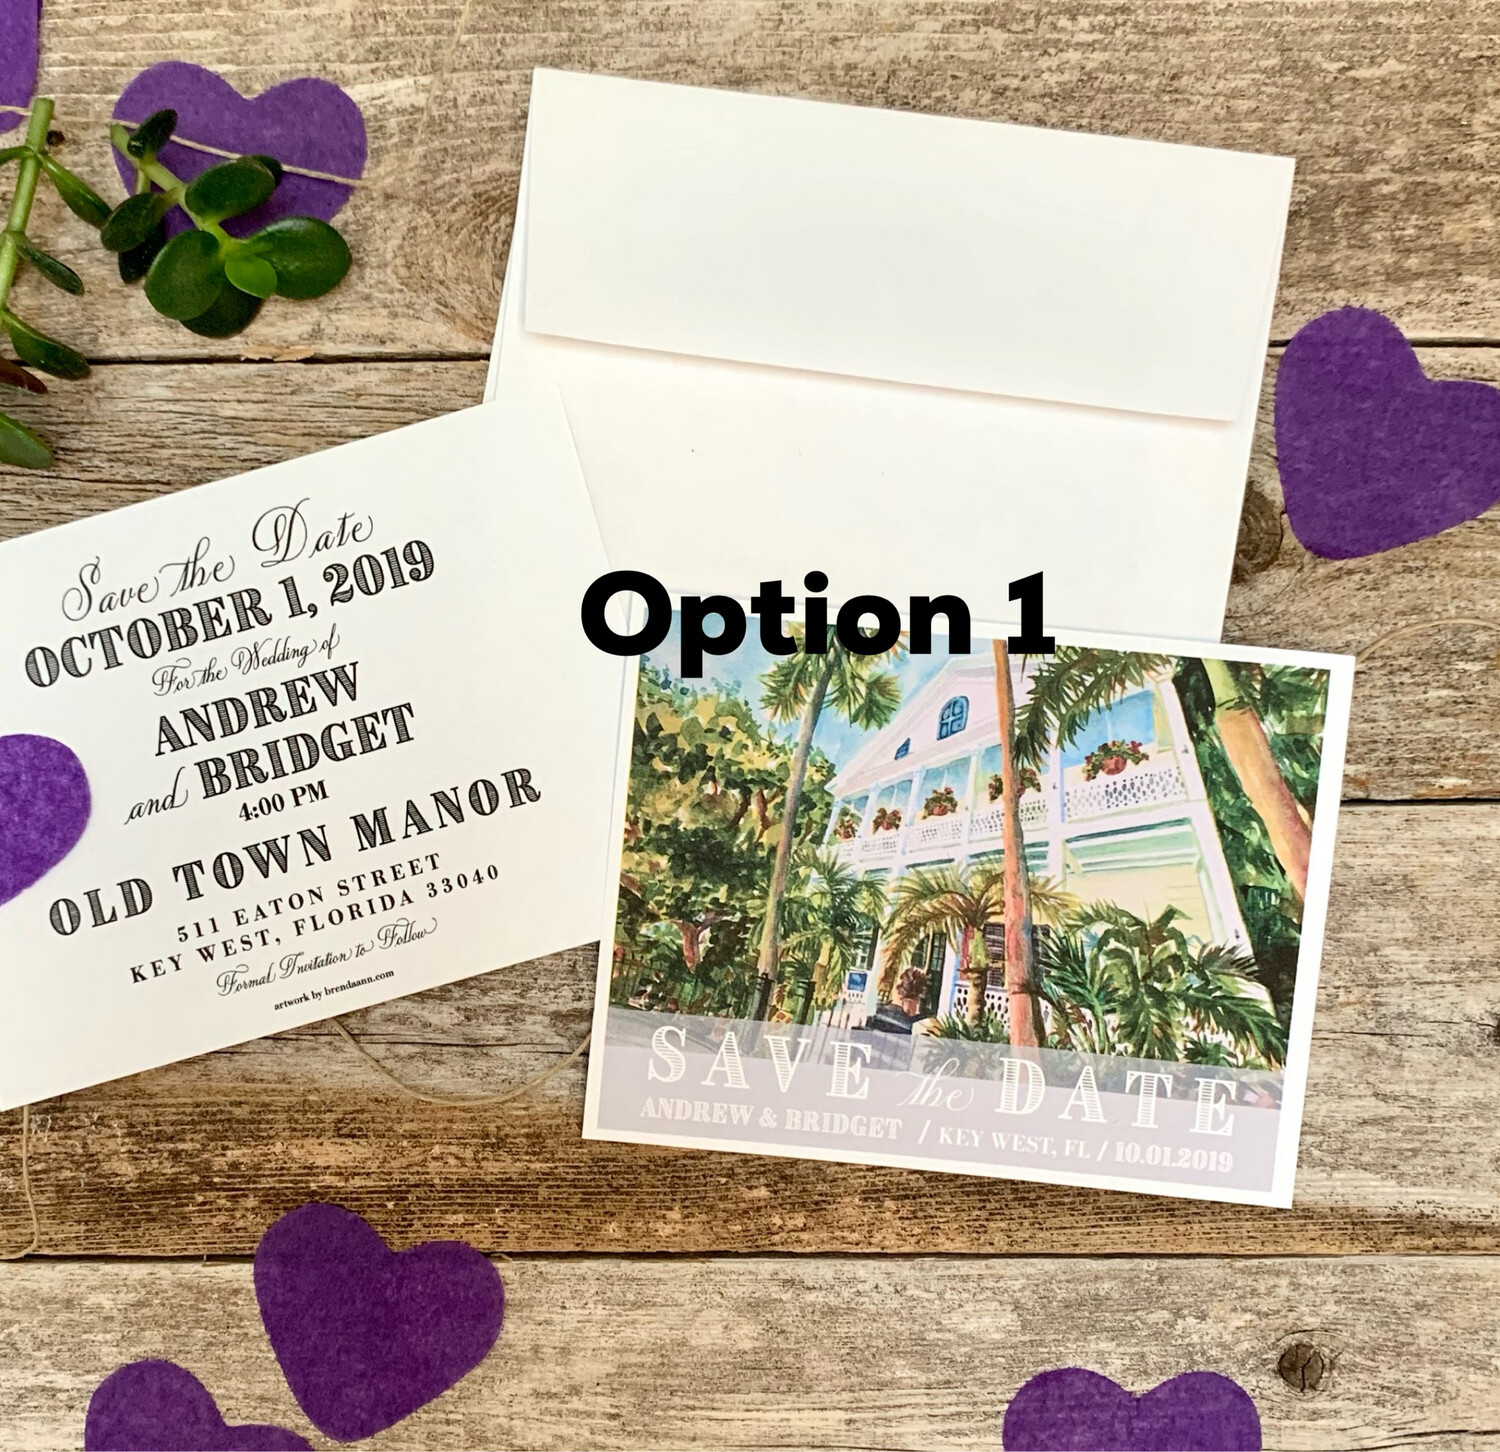 Old Town Manor Key West Watercolor Wedding Save the Date Cards